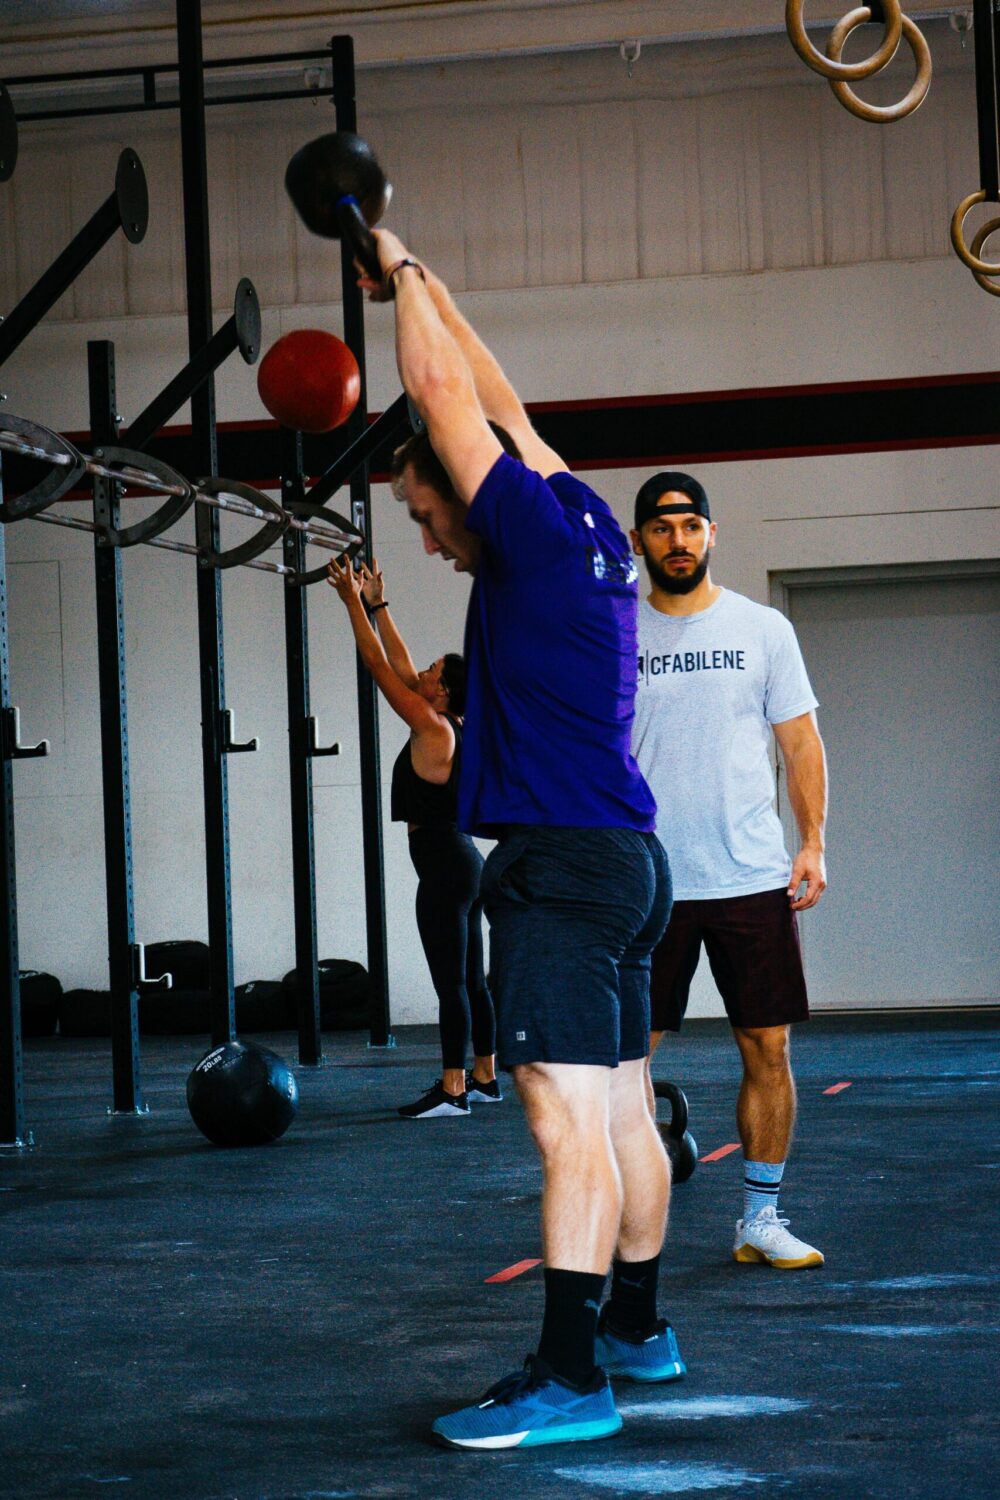 CrossFit Abilene Gym Member working out